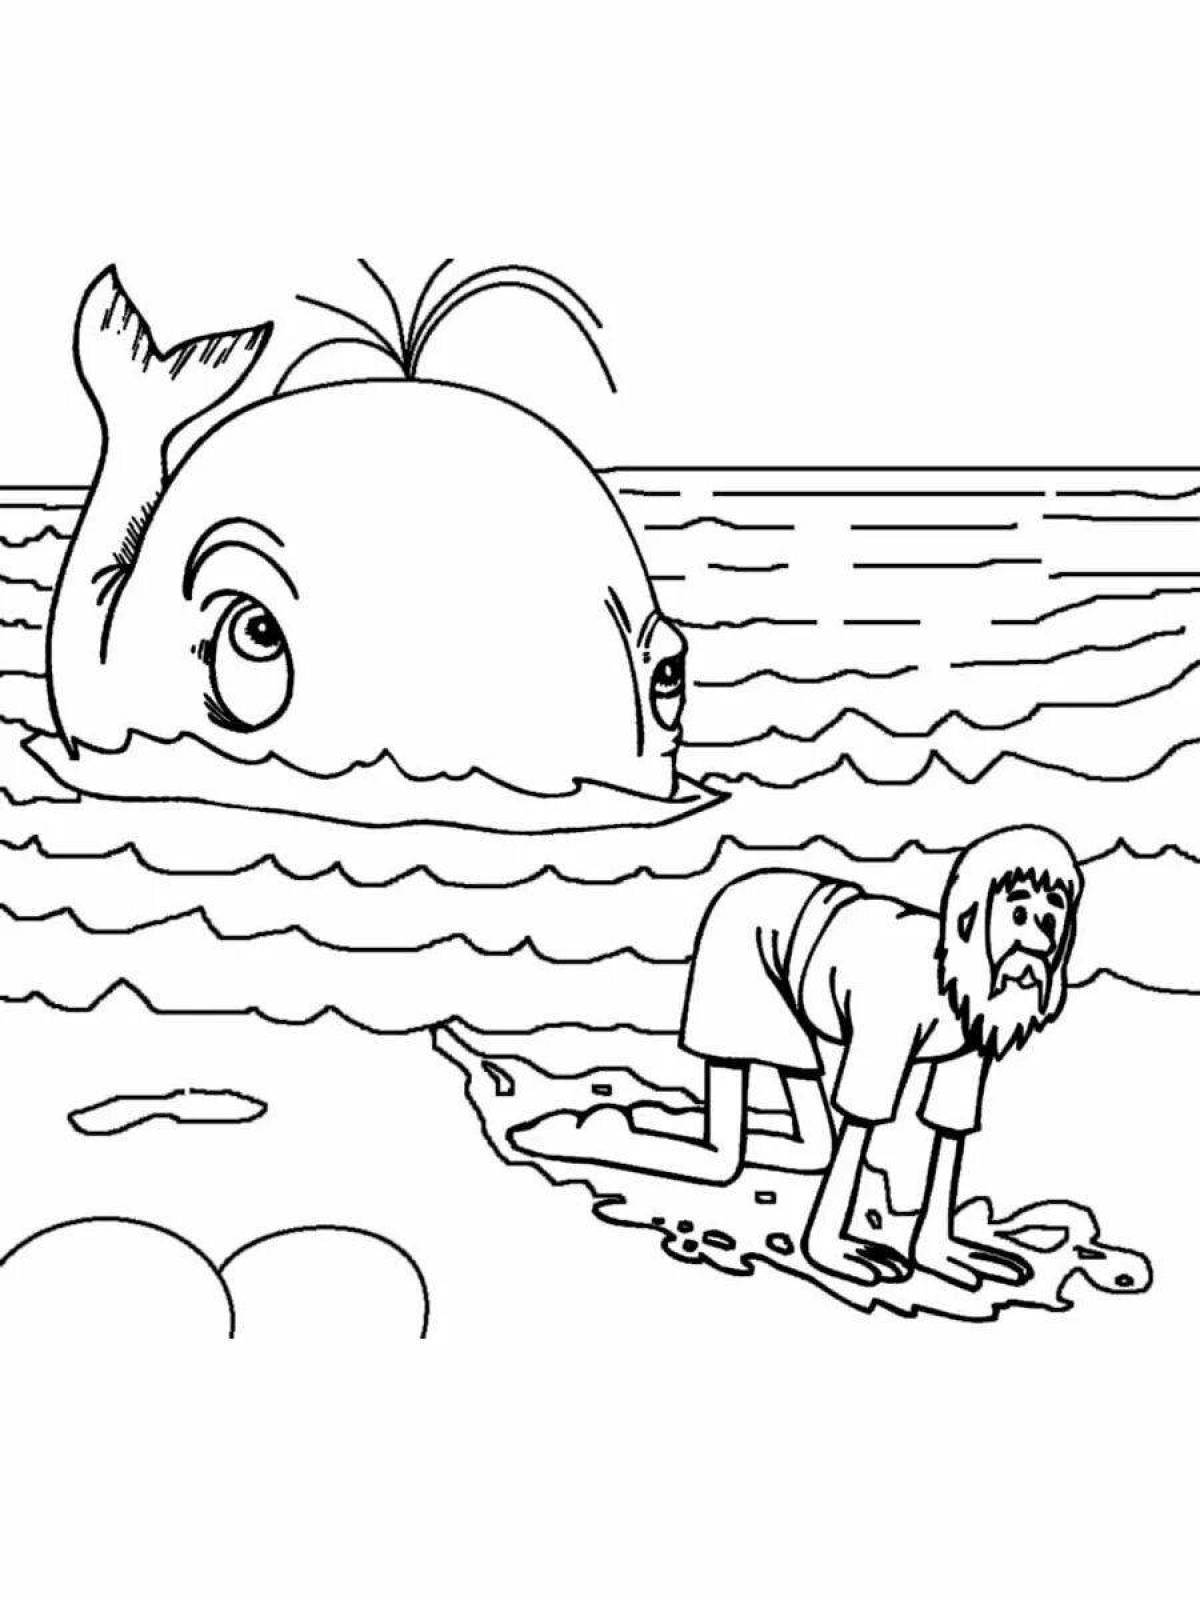 Whale and iona wonderful coloring book